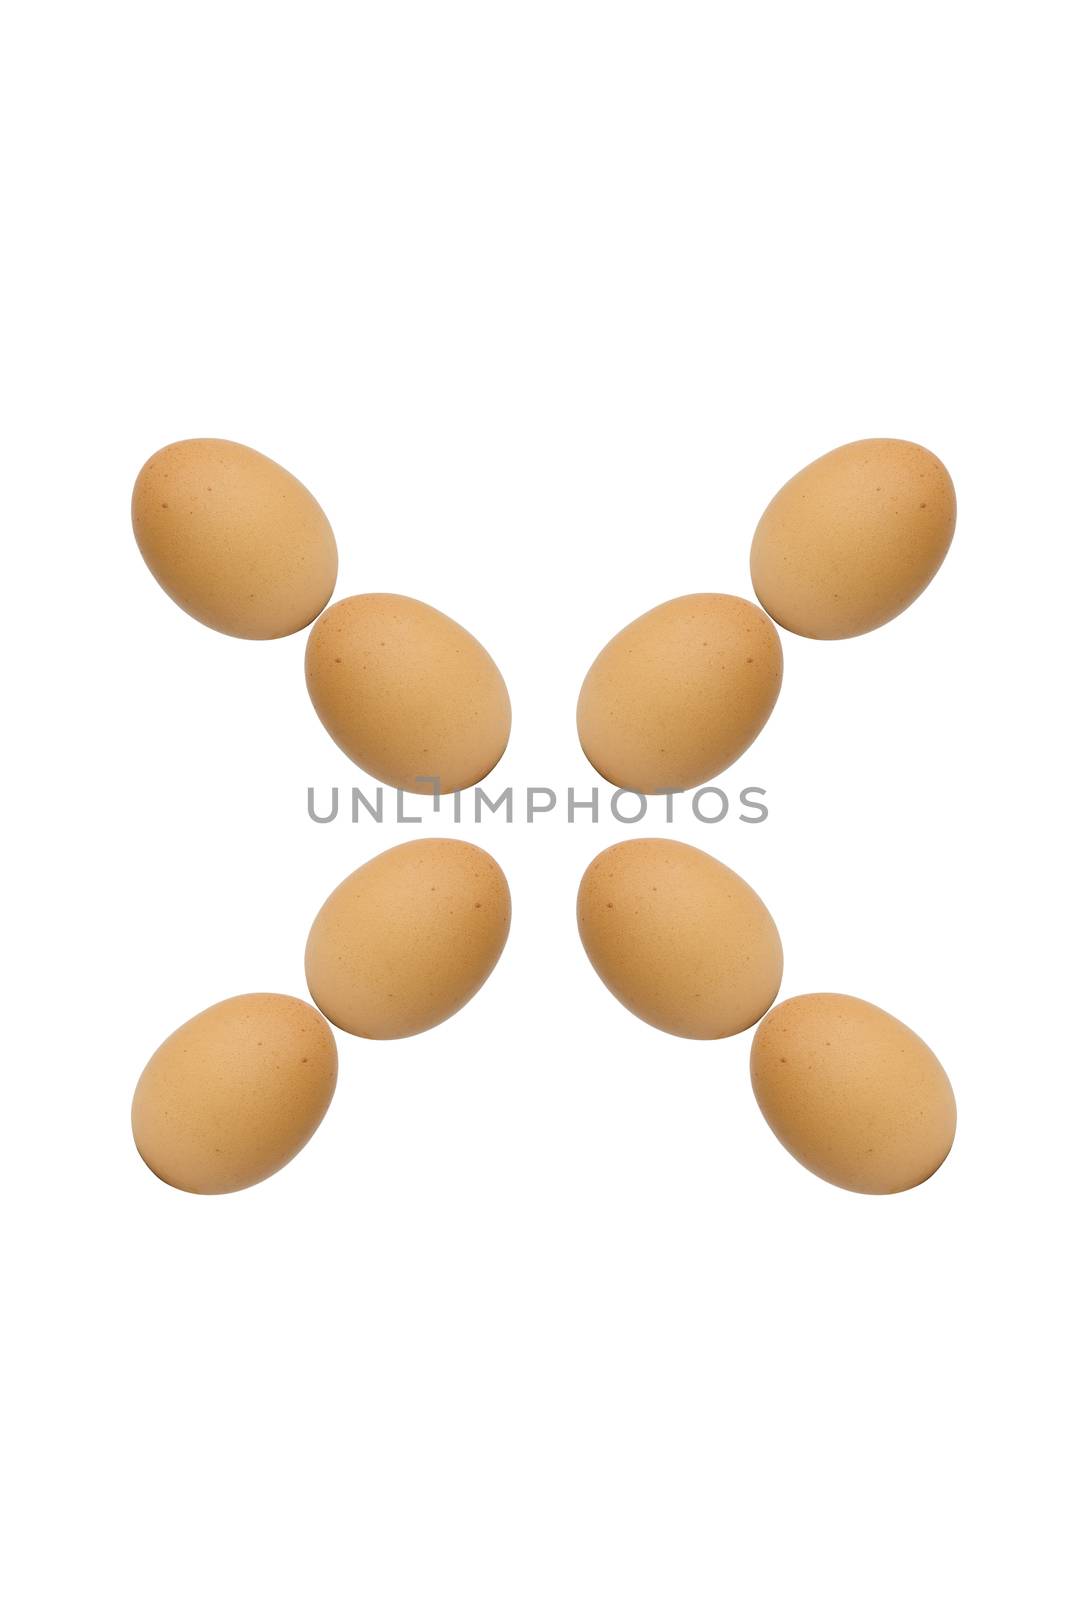 Alphabets  A to Z from brown eggs alphabet isolated on white background, X